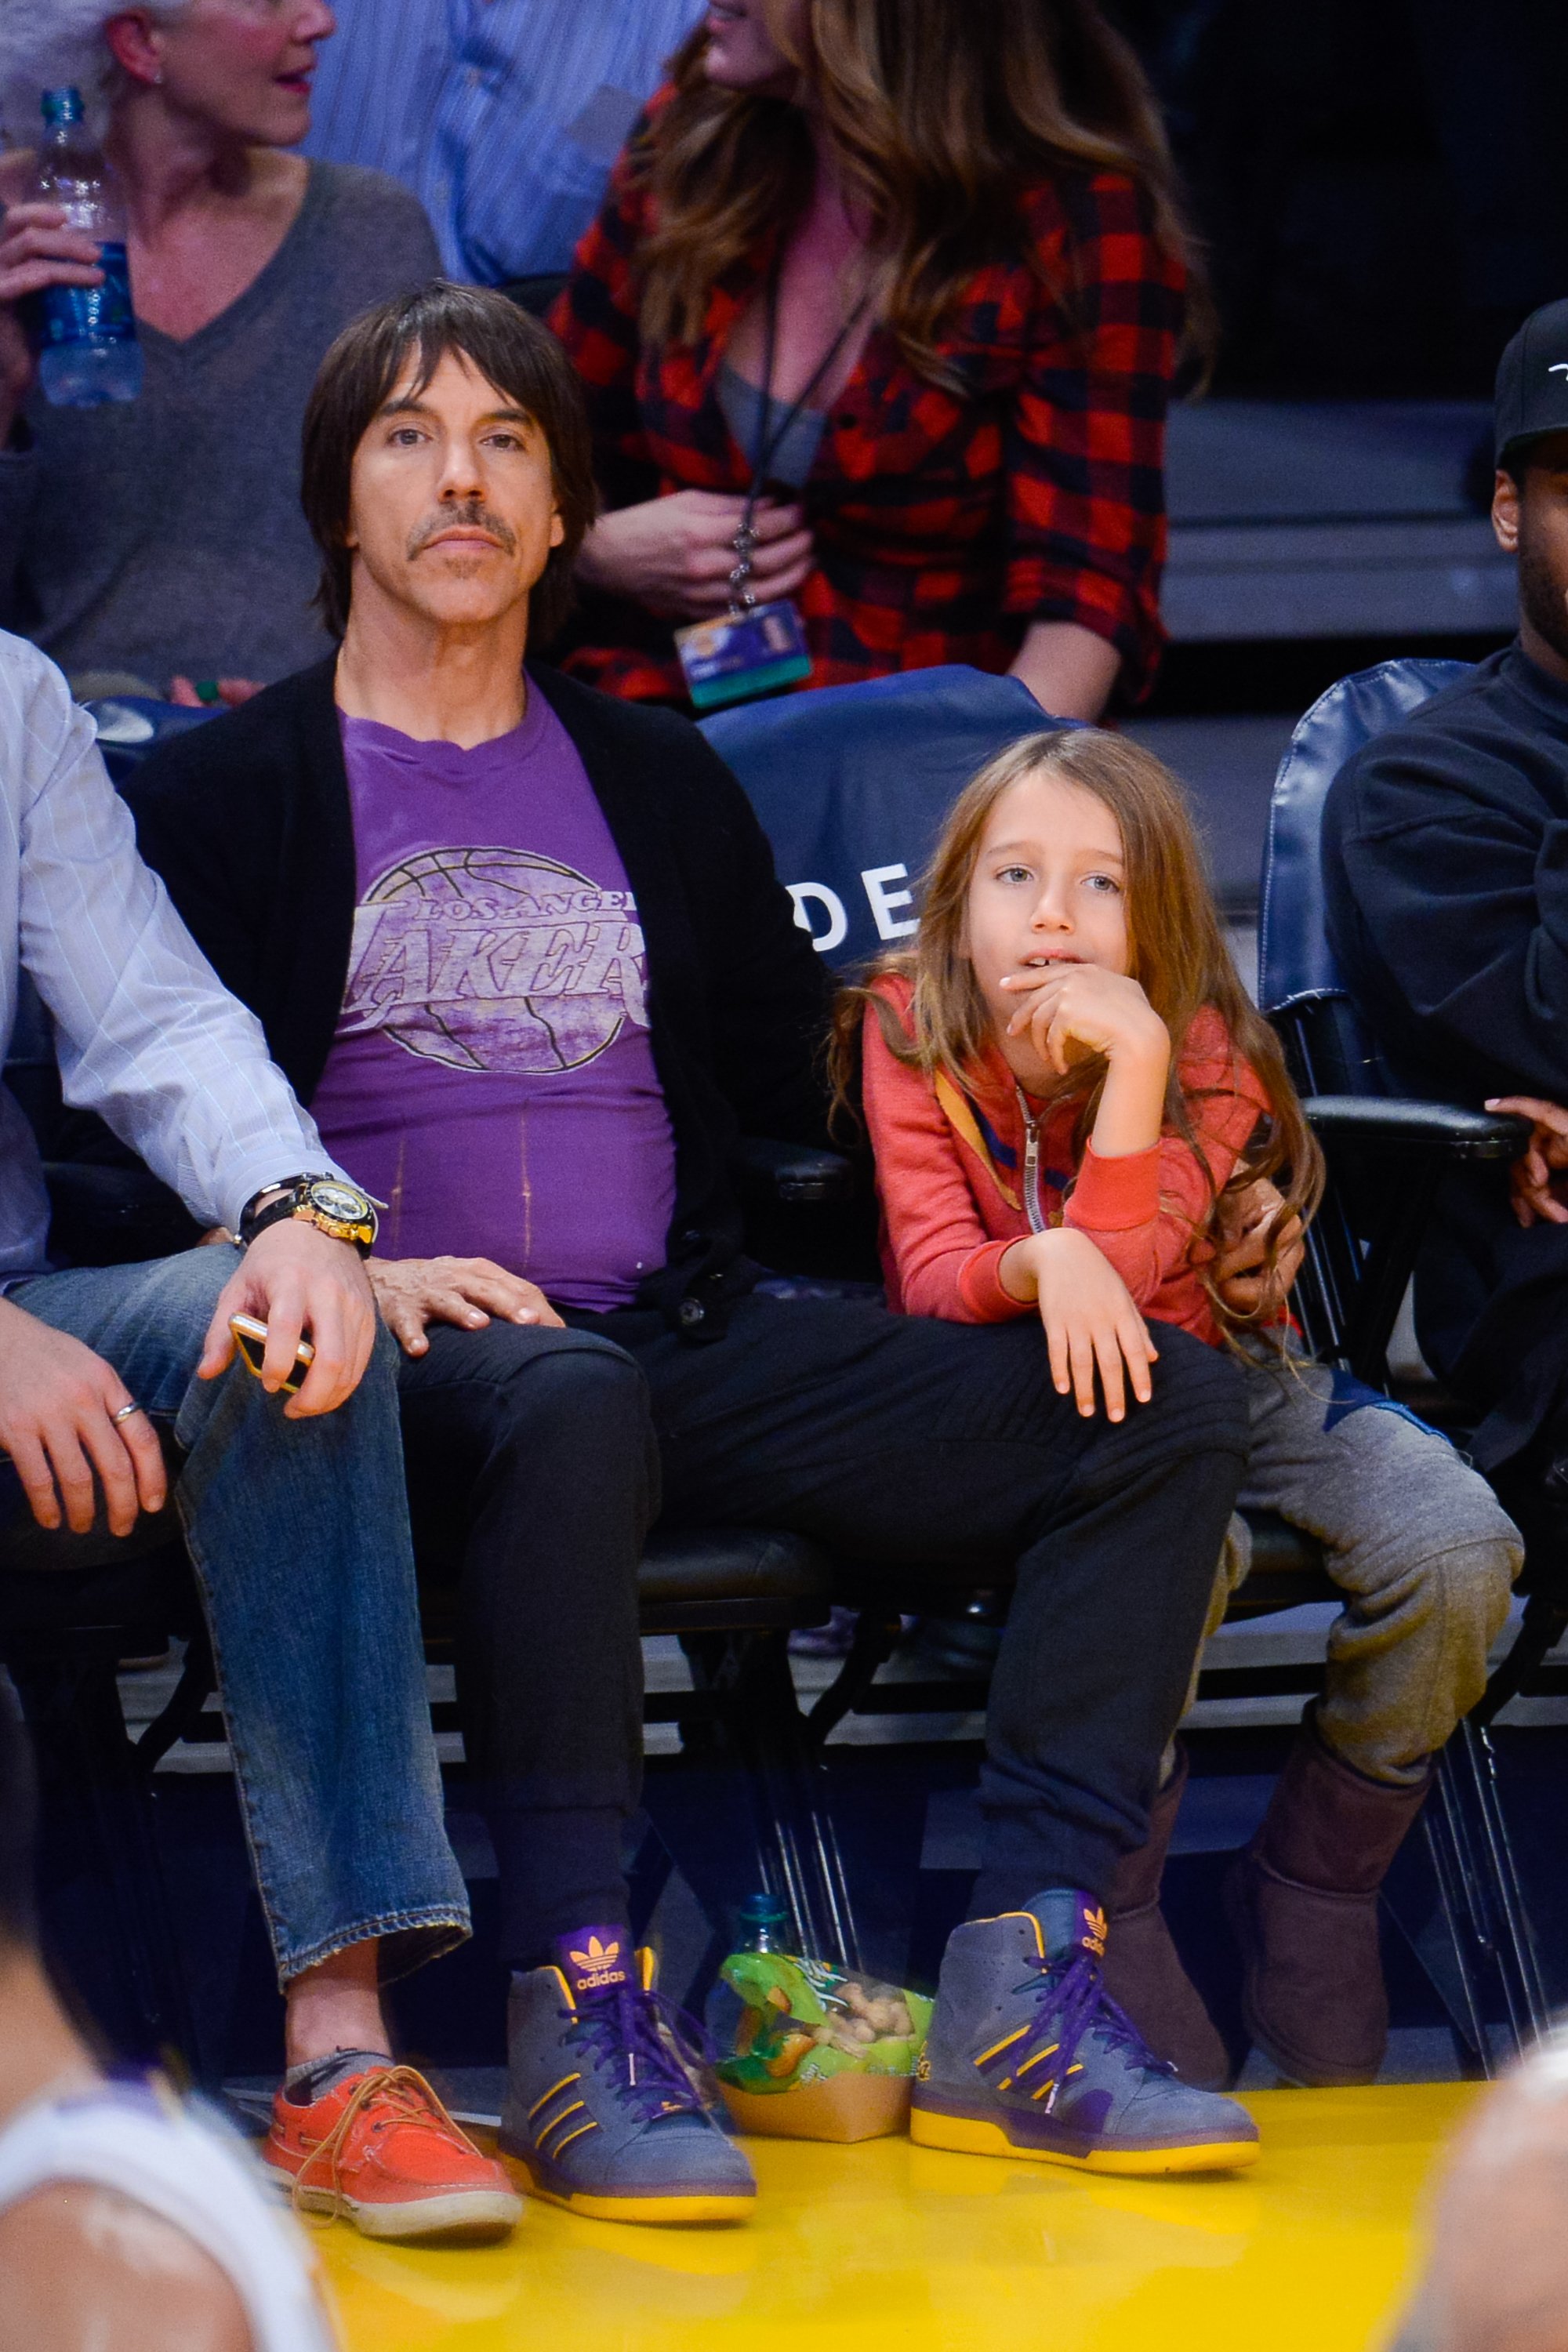 Anthony Kiedis and his son Everly Bear Kiedis at a basketball game between the New Orleans Pelicans and the Los Angeles Lakers at Staples Center on December 7, 2014 in Los Angeles, California. | Source: Getty Images